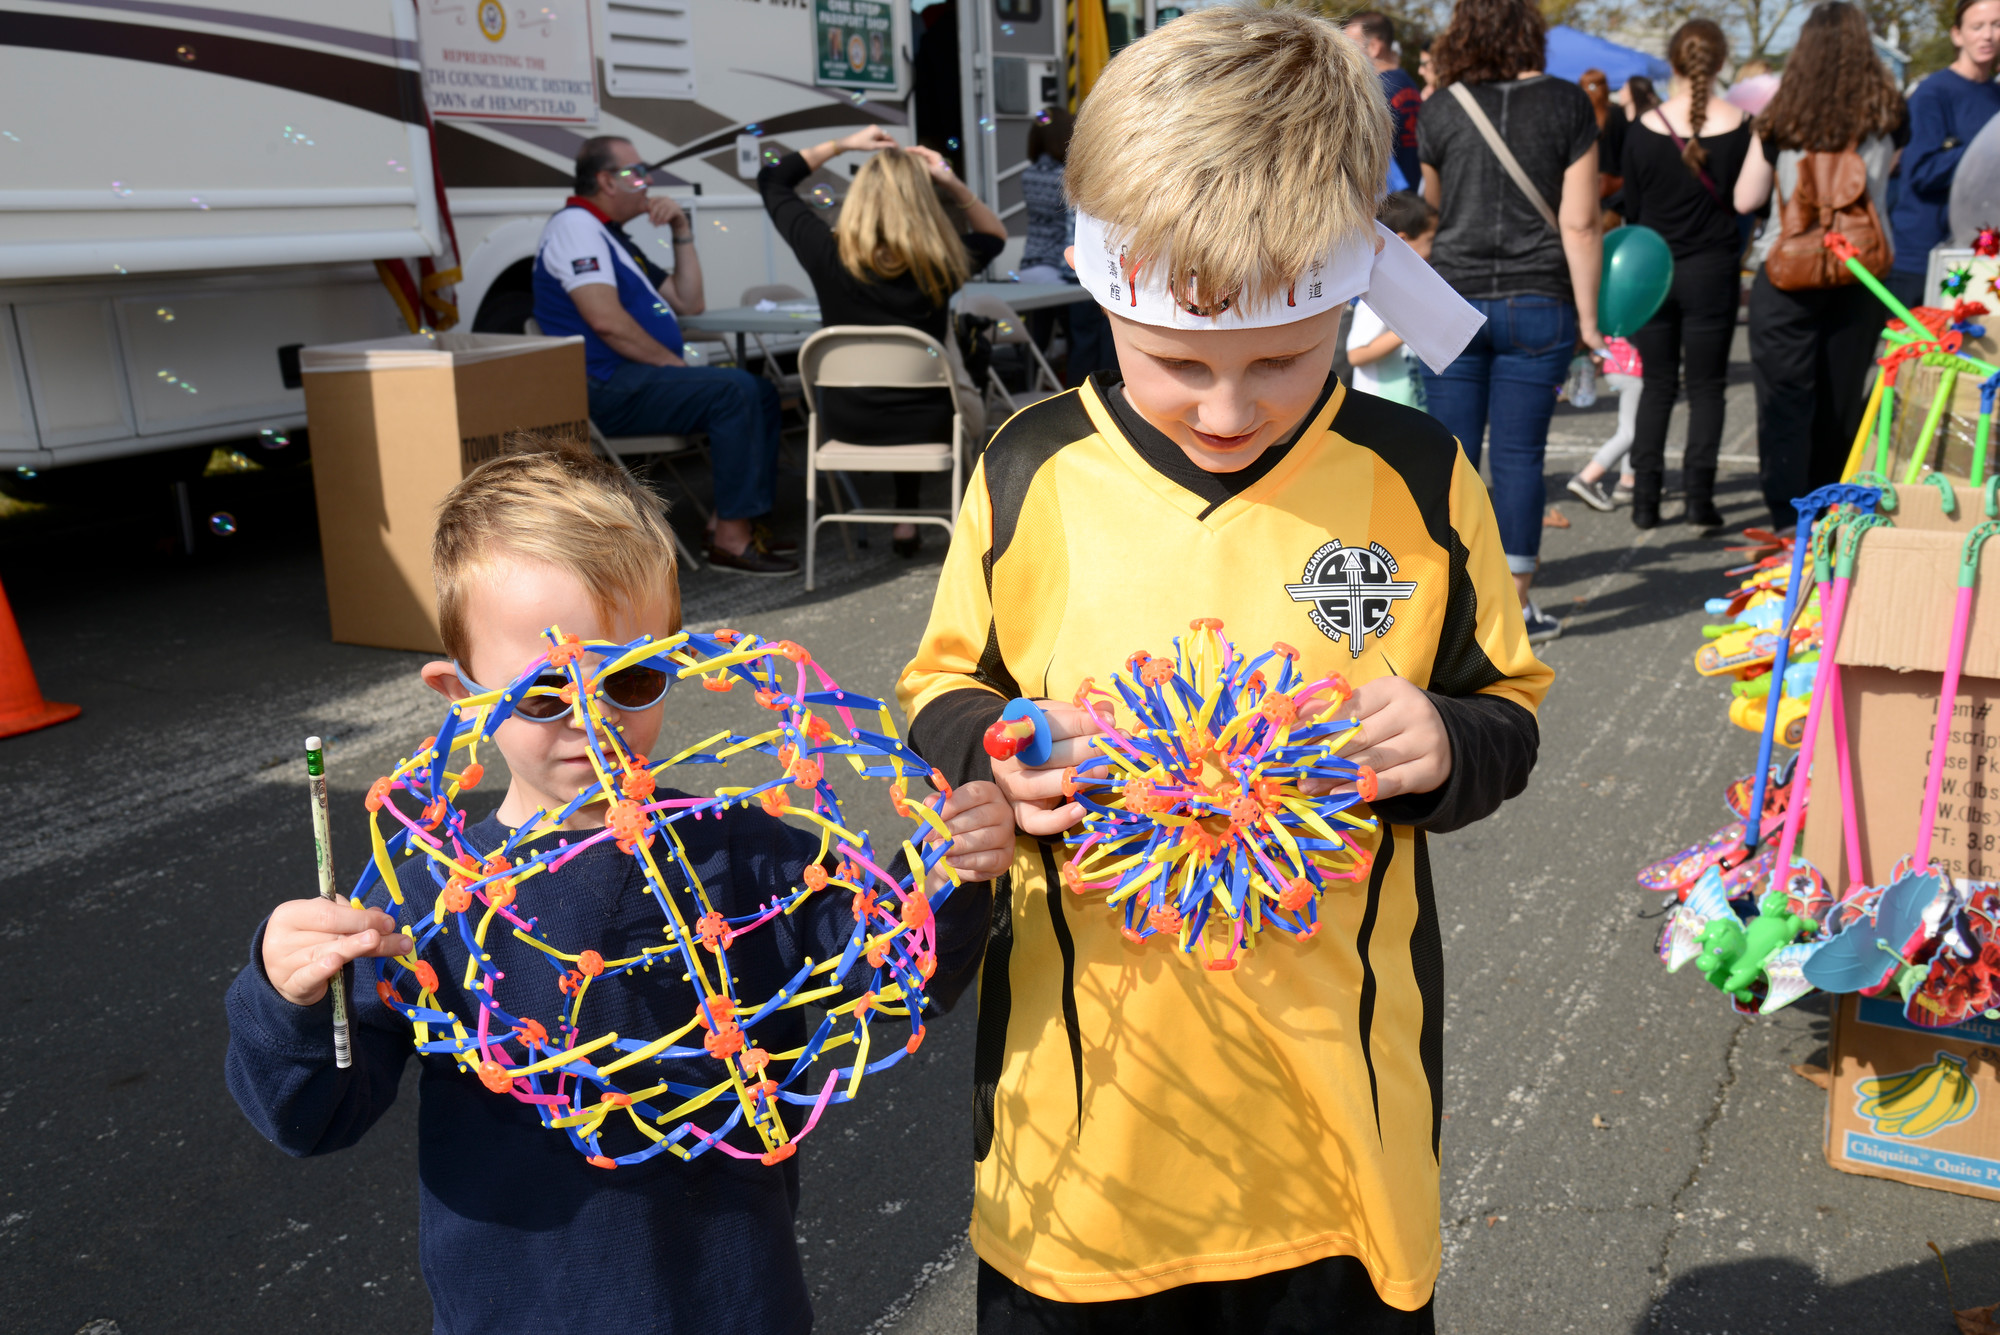 Liam Gausman, 4, and his brother Keiran, 6, had a hands-on experience at the chamber fair on Oct. 18.